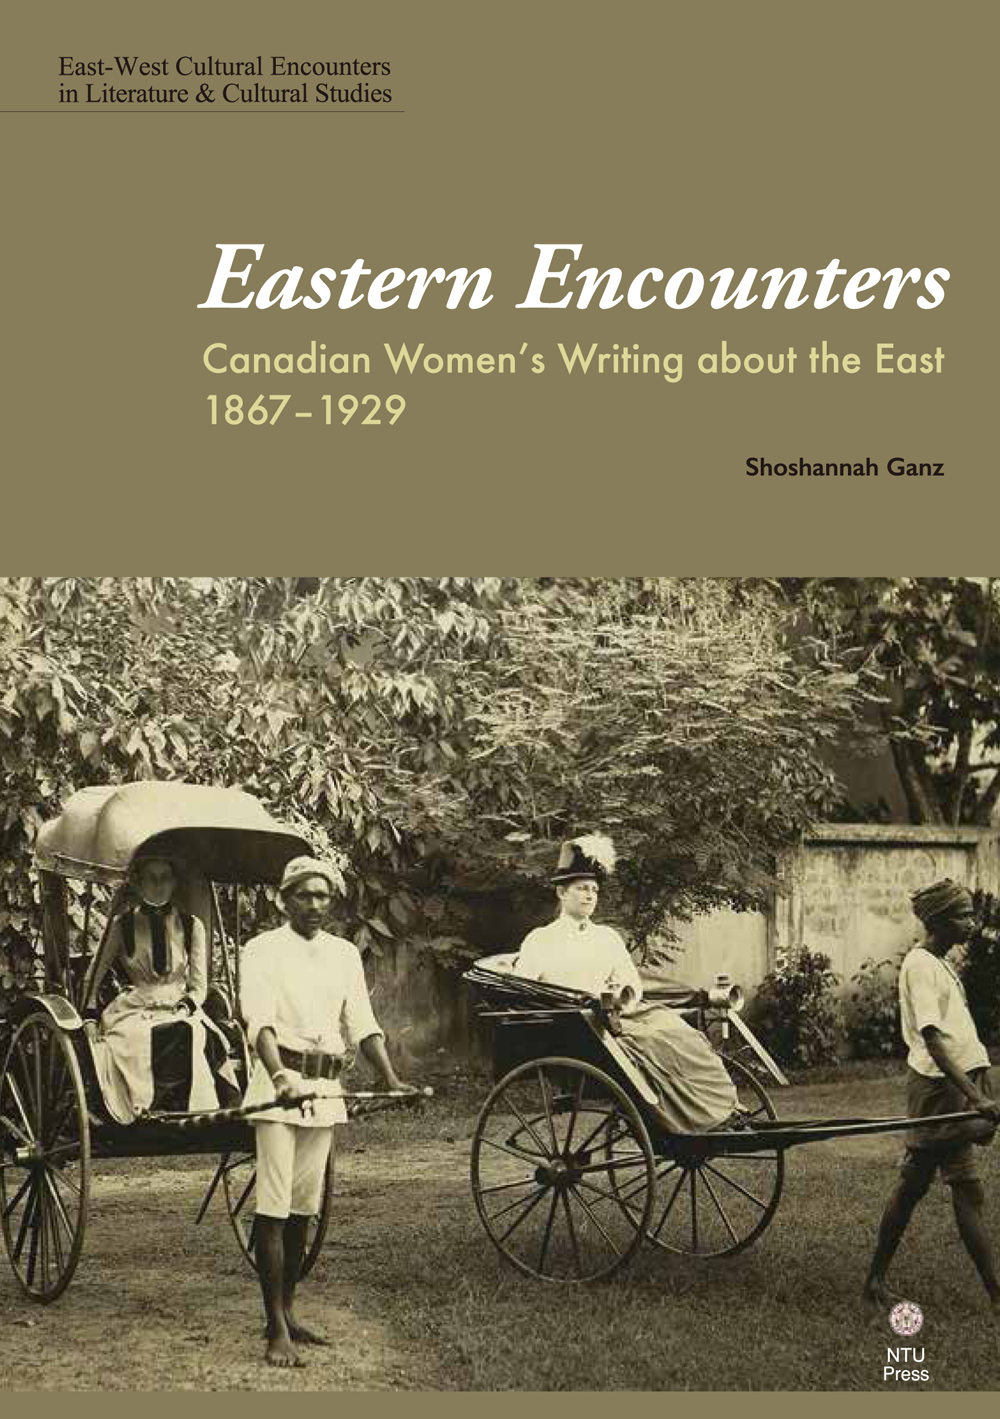 Eastern Encounters: Canadian Women's Writing about the East, 1867-1929